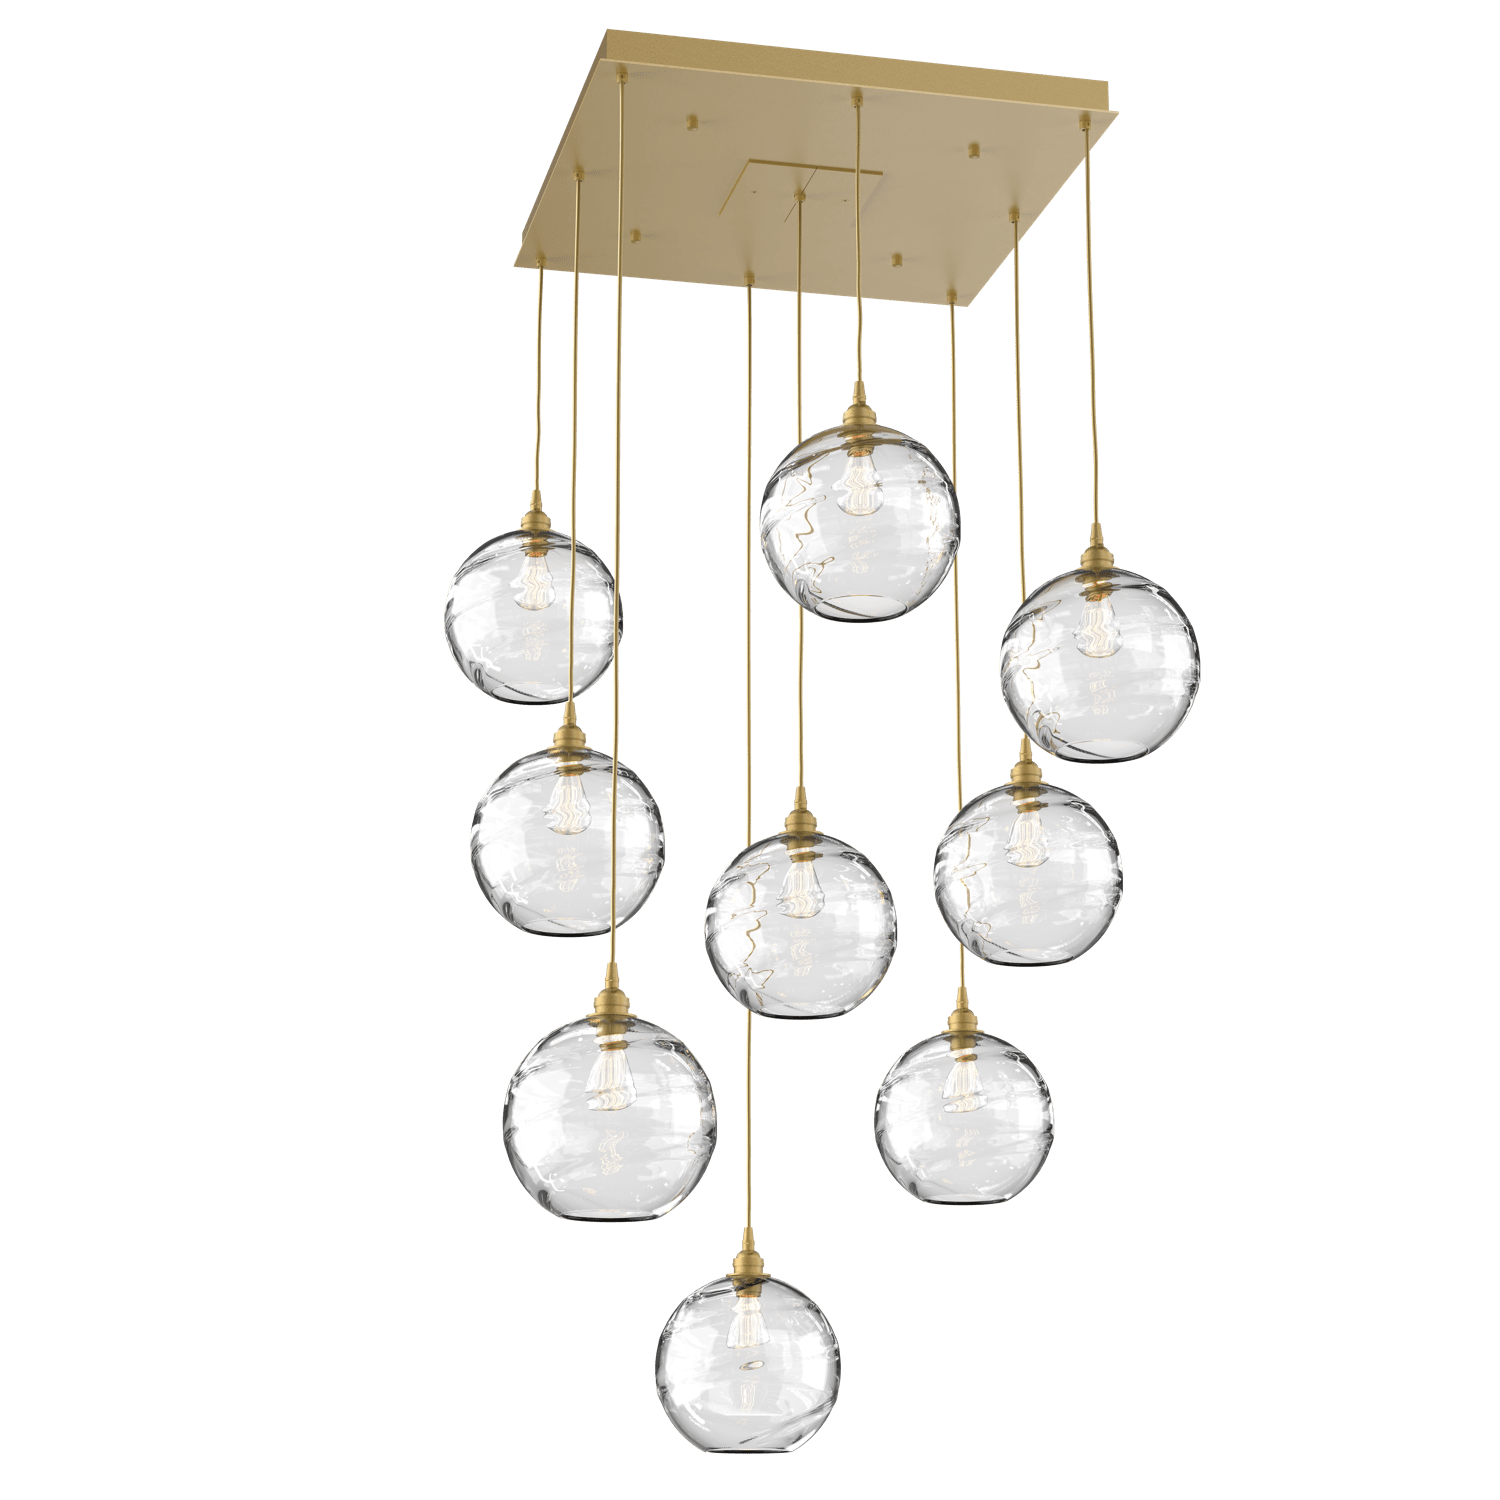 CHB0047-09-GB-OC-Hammerton-Studio-Optic-Blown-Glass-Terra-9-light-square-pendant-chandelier-with-gilded-brass-finish-and-optic-clear-blown-glass-shades-and-incandescent-lamping